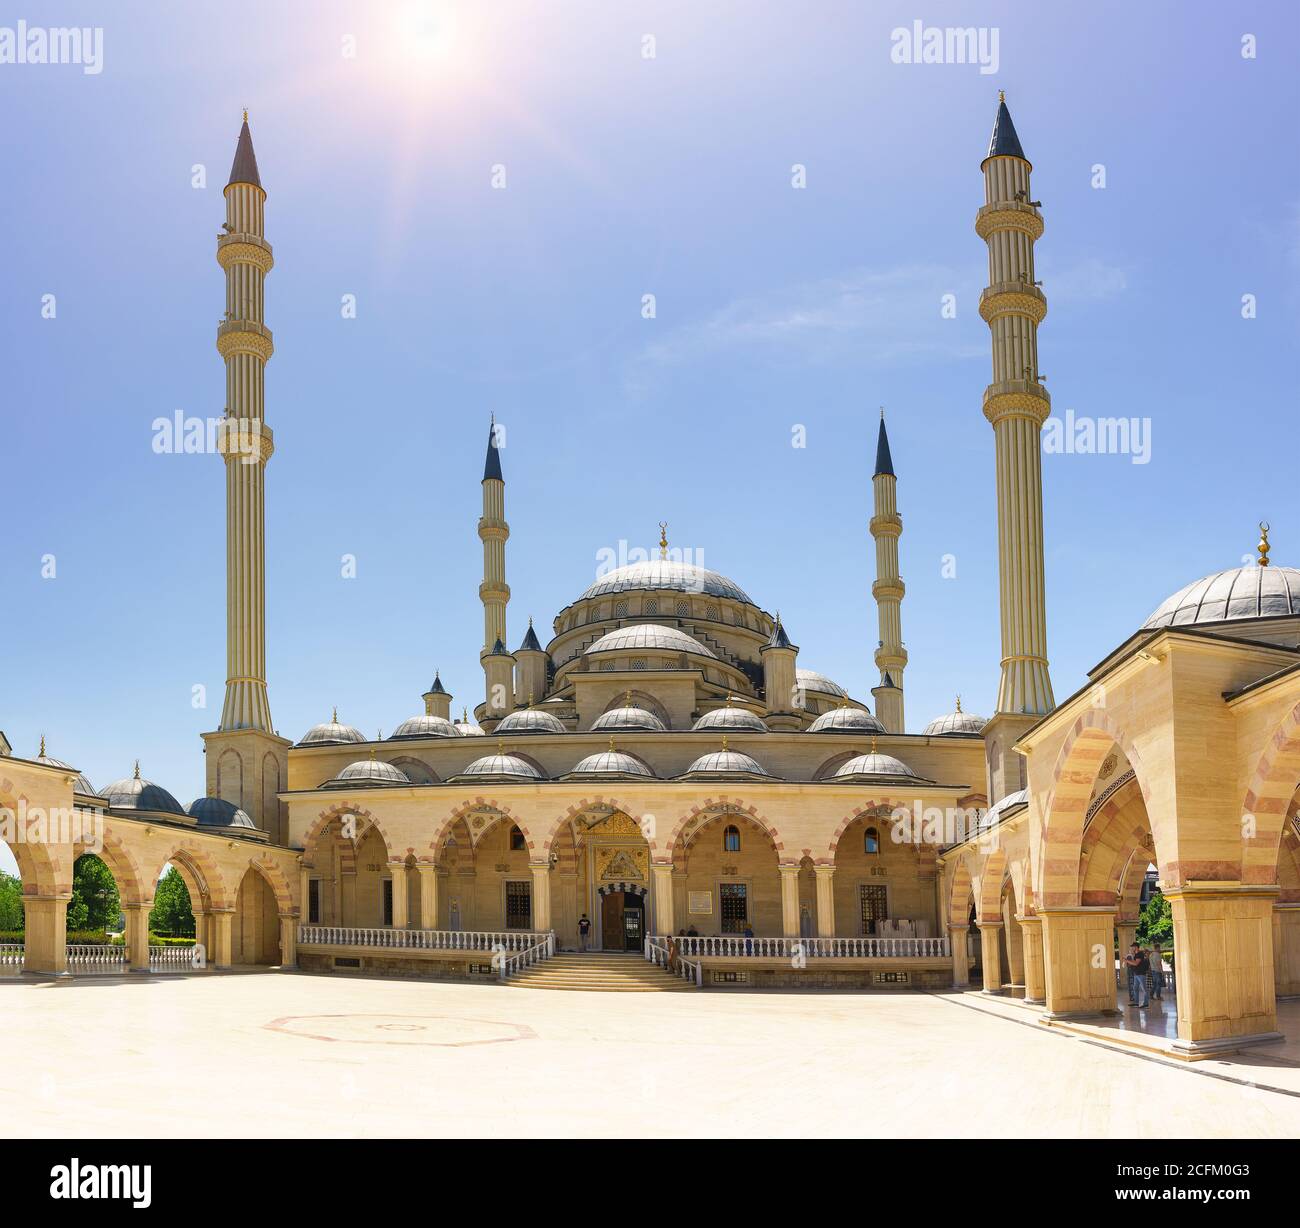 Grozny, Chechen Republic, Russia - June 02, 2019: one of the largest mosques in Russia and Europe the Heart of Chechnya named after Akhmat Kadyrov Stock Photo